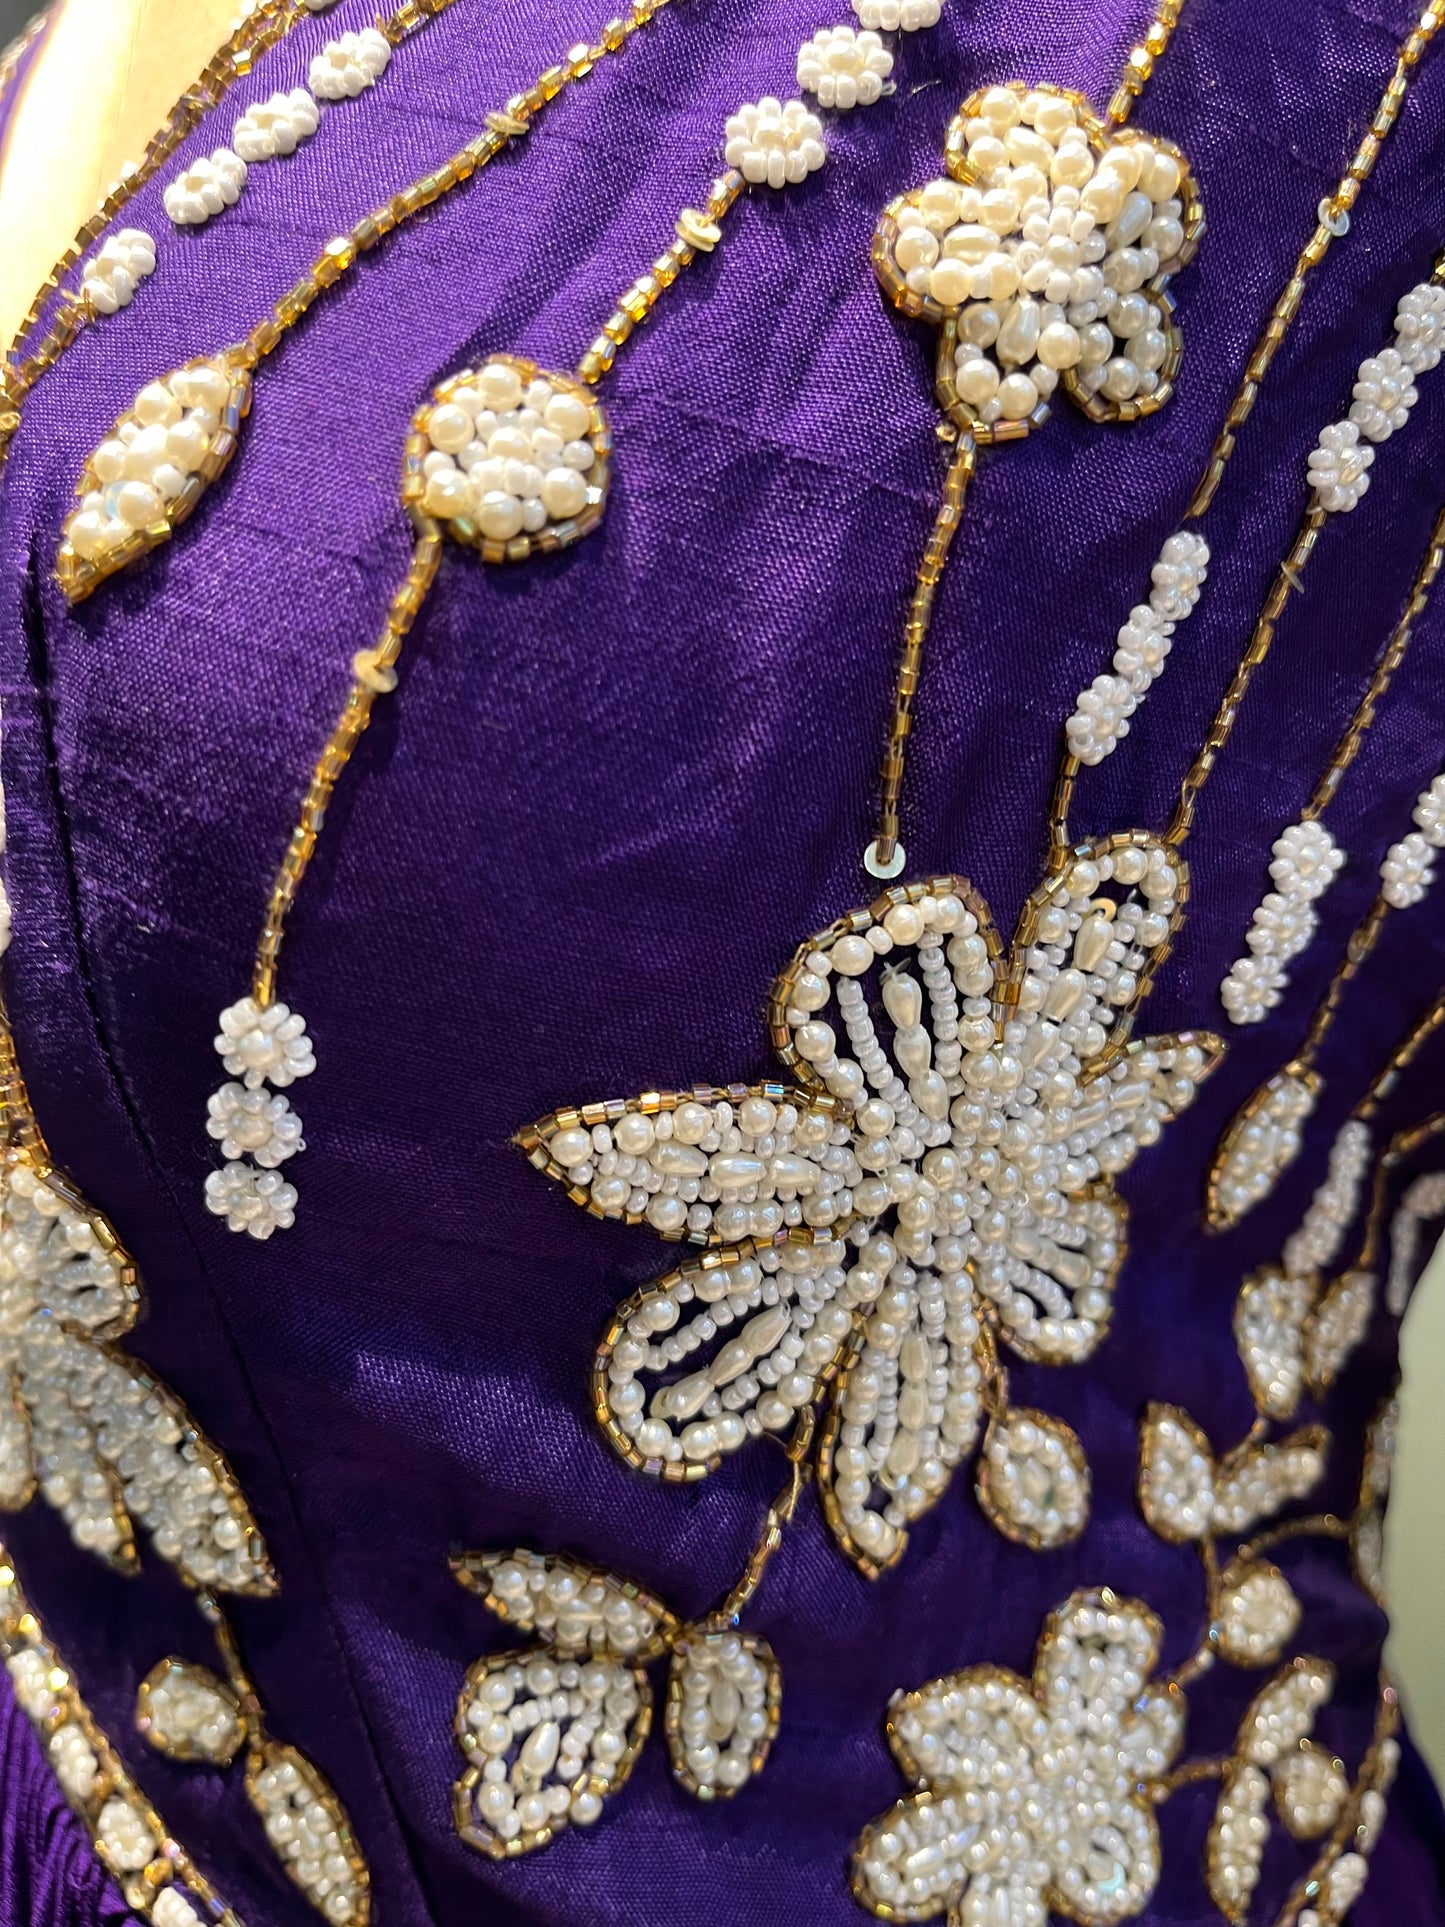 PURPLE COLOUR GEORGETTE FLOOR LENGTH SUIT WITH NET DUPATTA EMBELLISHED WITH PEARLWORK